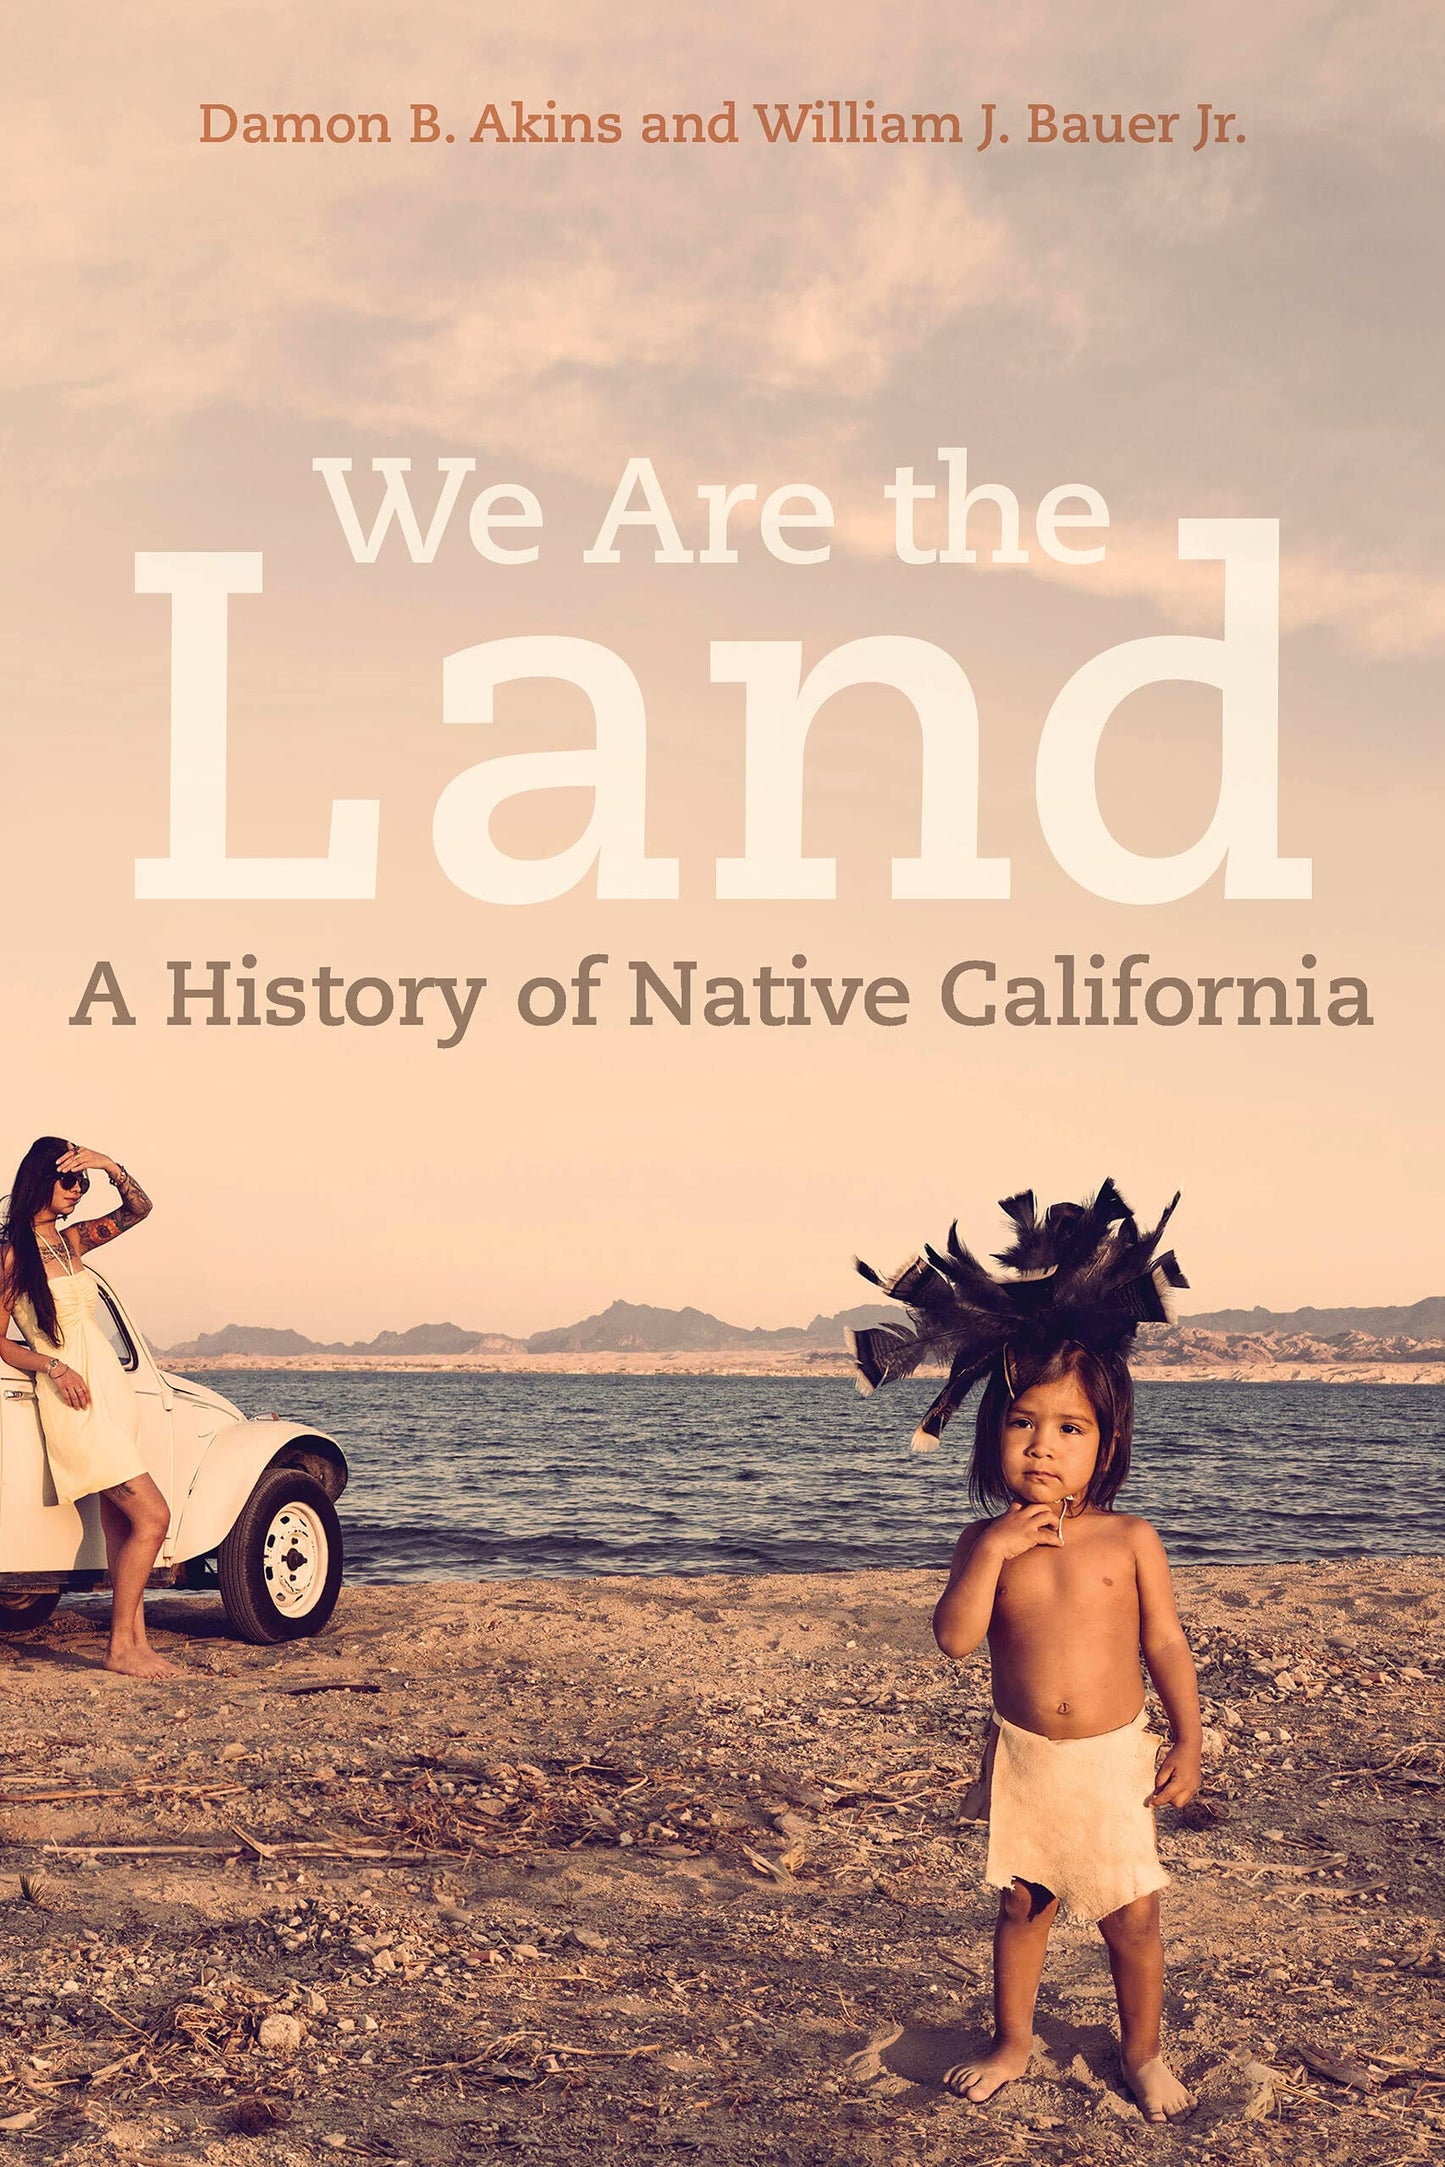 We Are the Land // A History of Native California